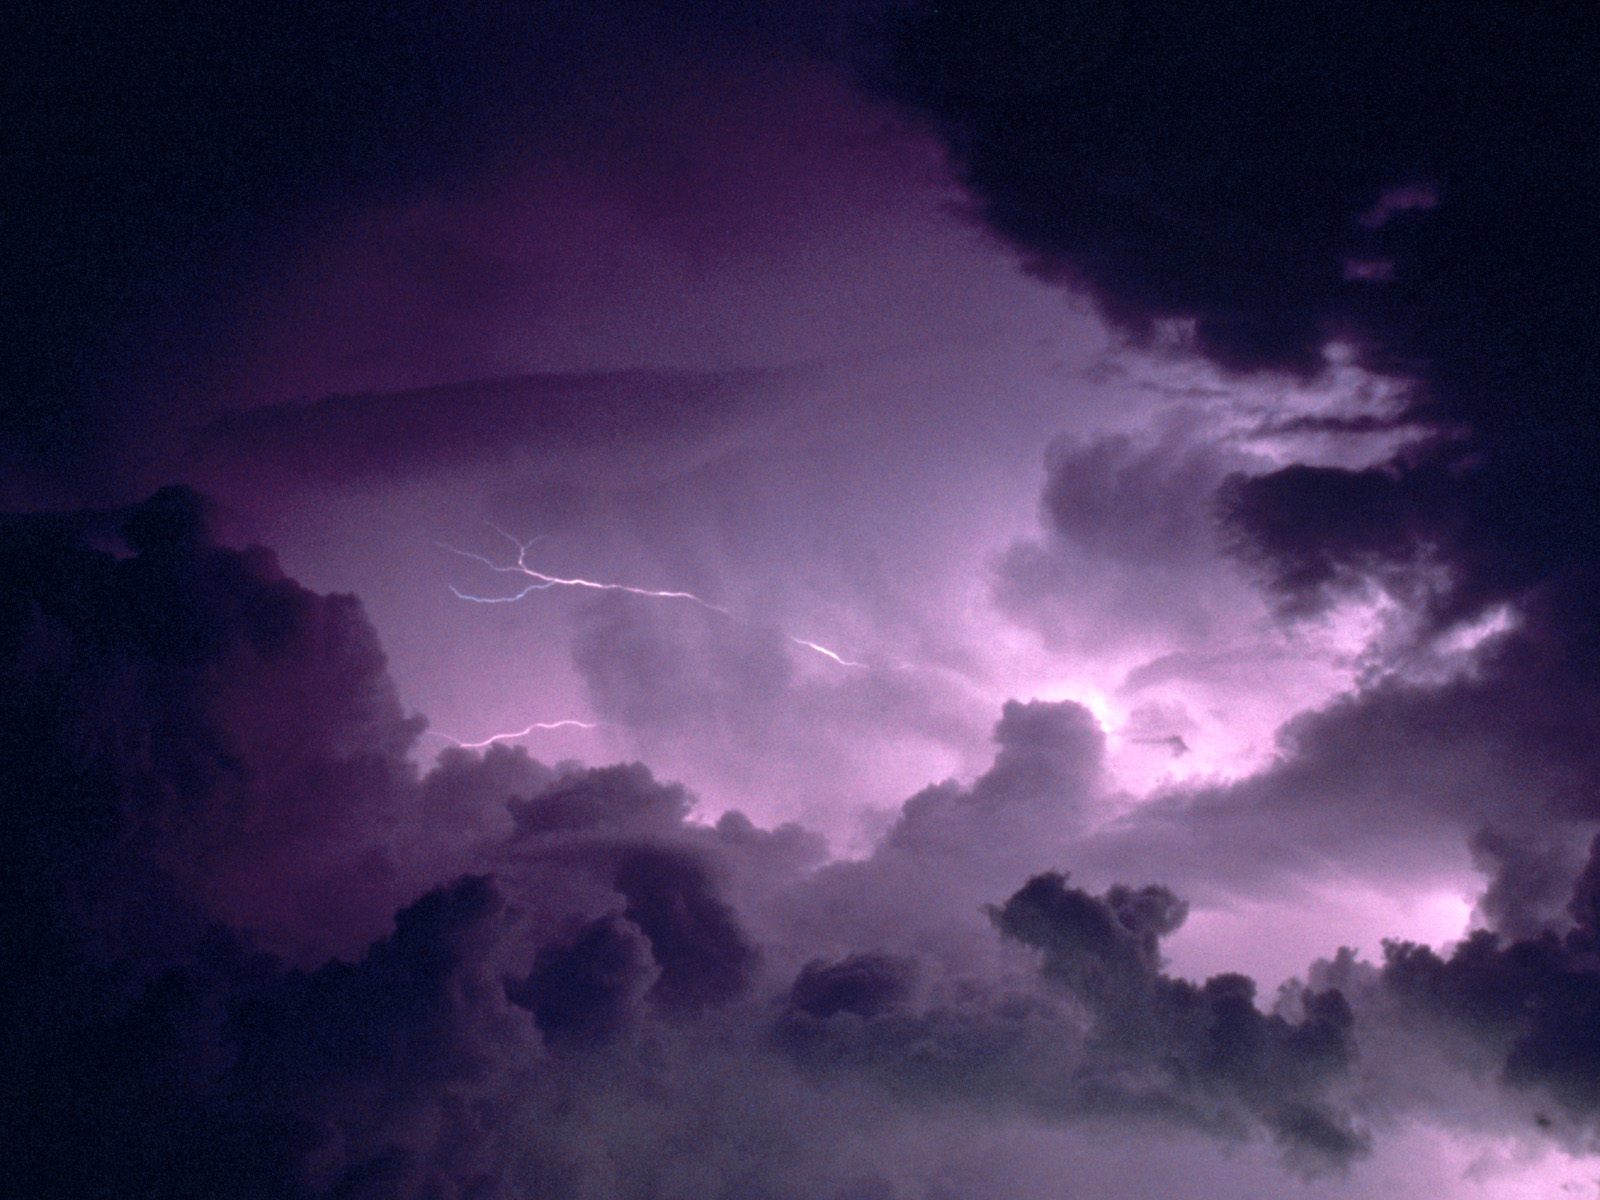 Stormy Weather Wallpaper Image Featuring Storms